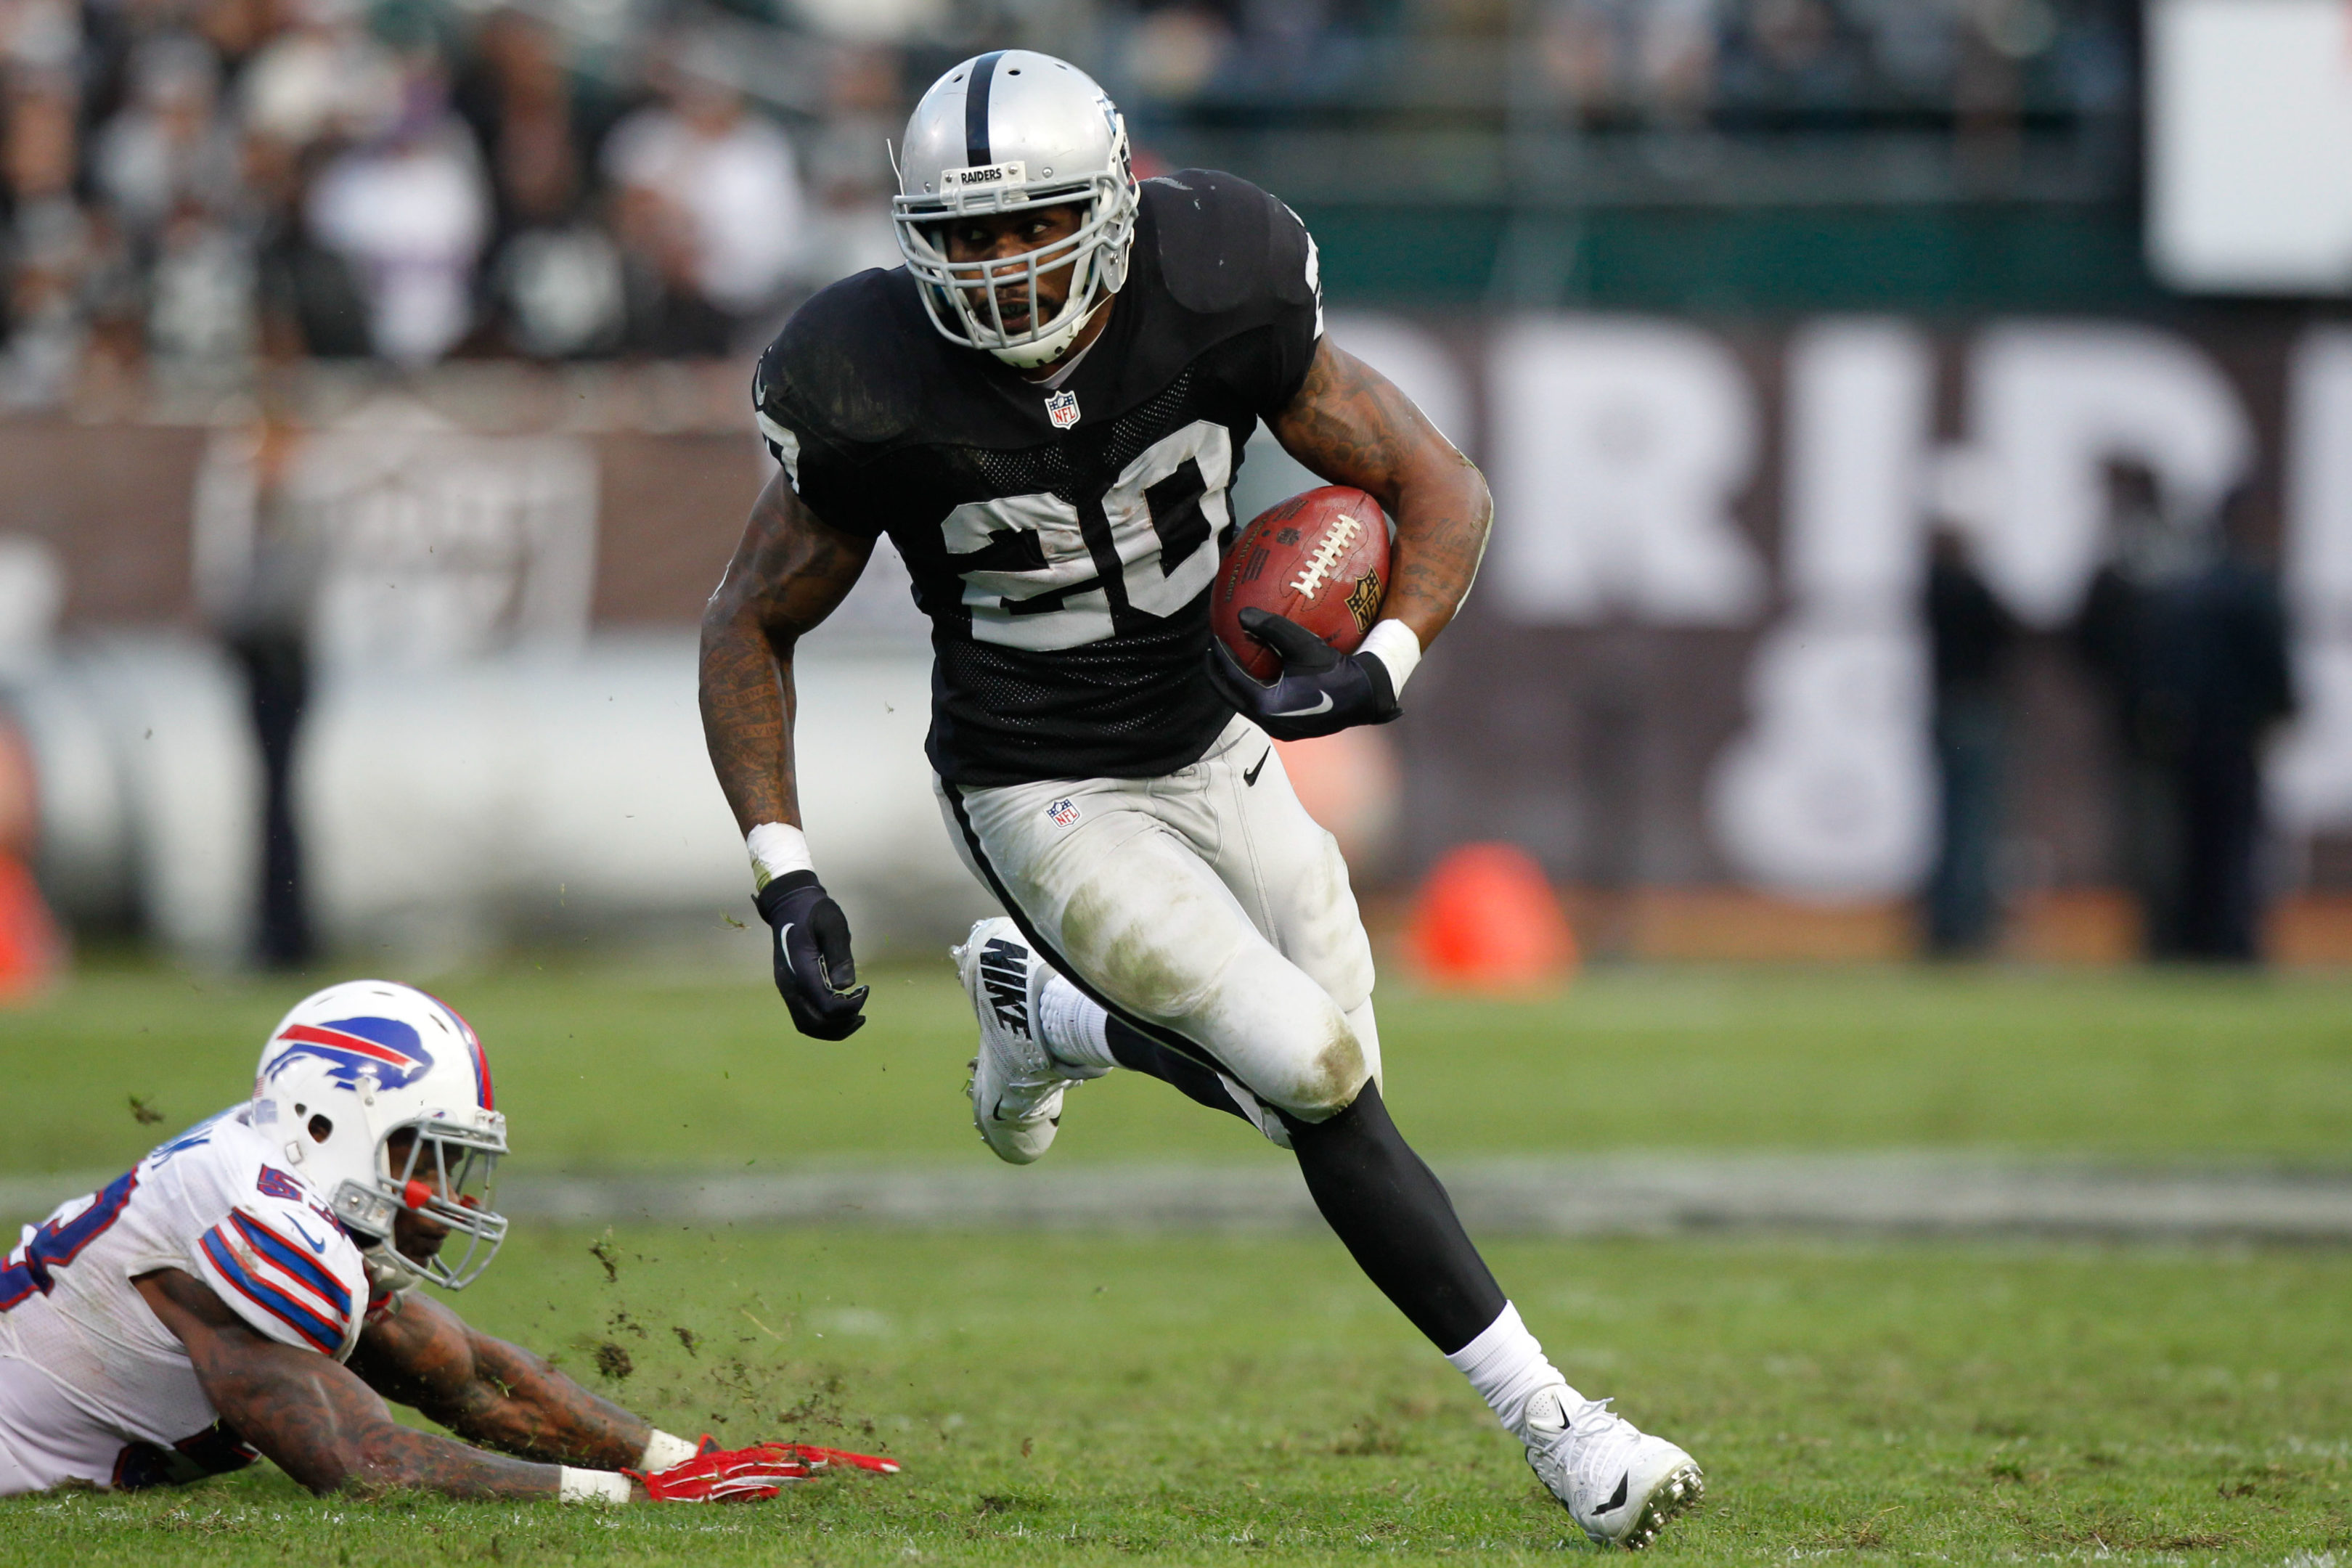 Darren McFadden was on his way to becoming one of the best Raider running backs until injuries plagued his career. 